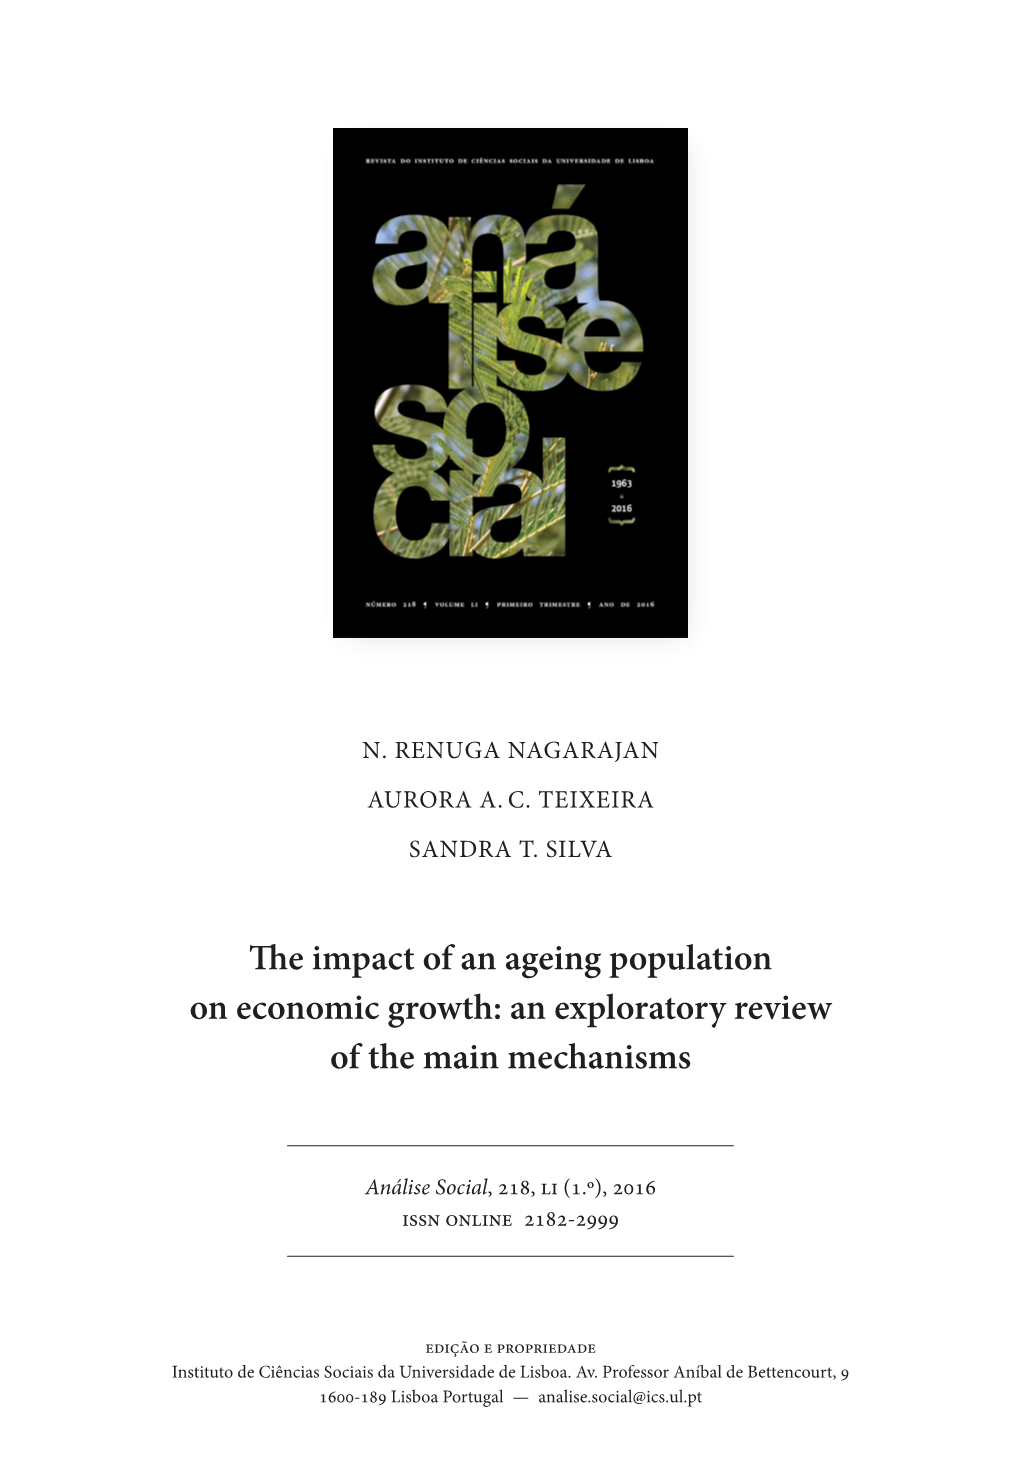 The Impact of an Ageing Population on Economic Growth: an Exploratory Review of the Main Mechanisms